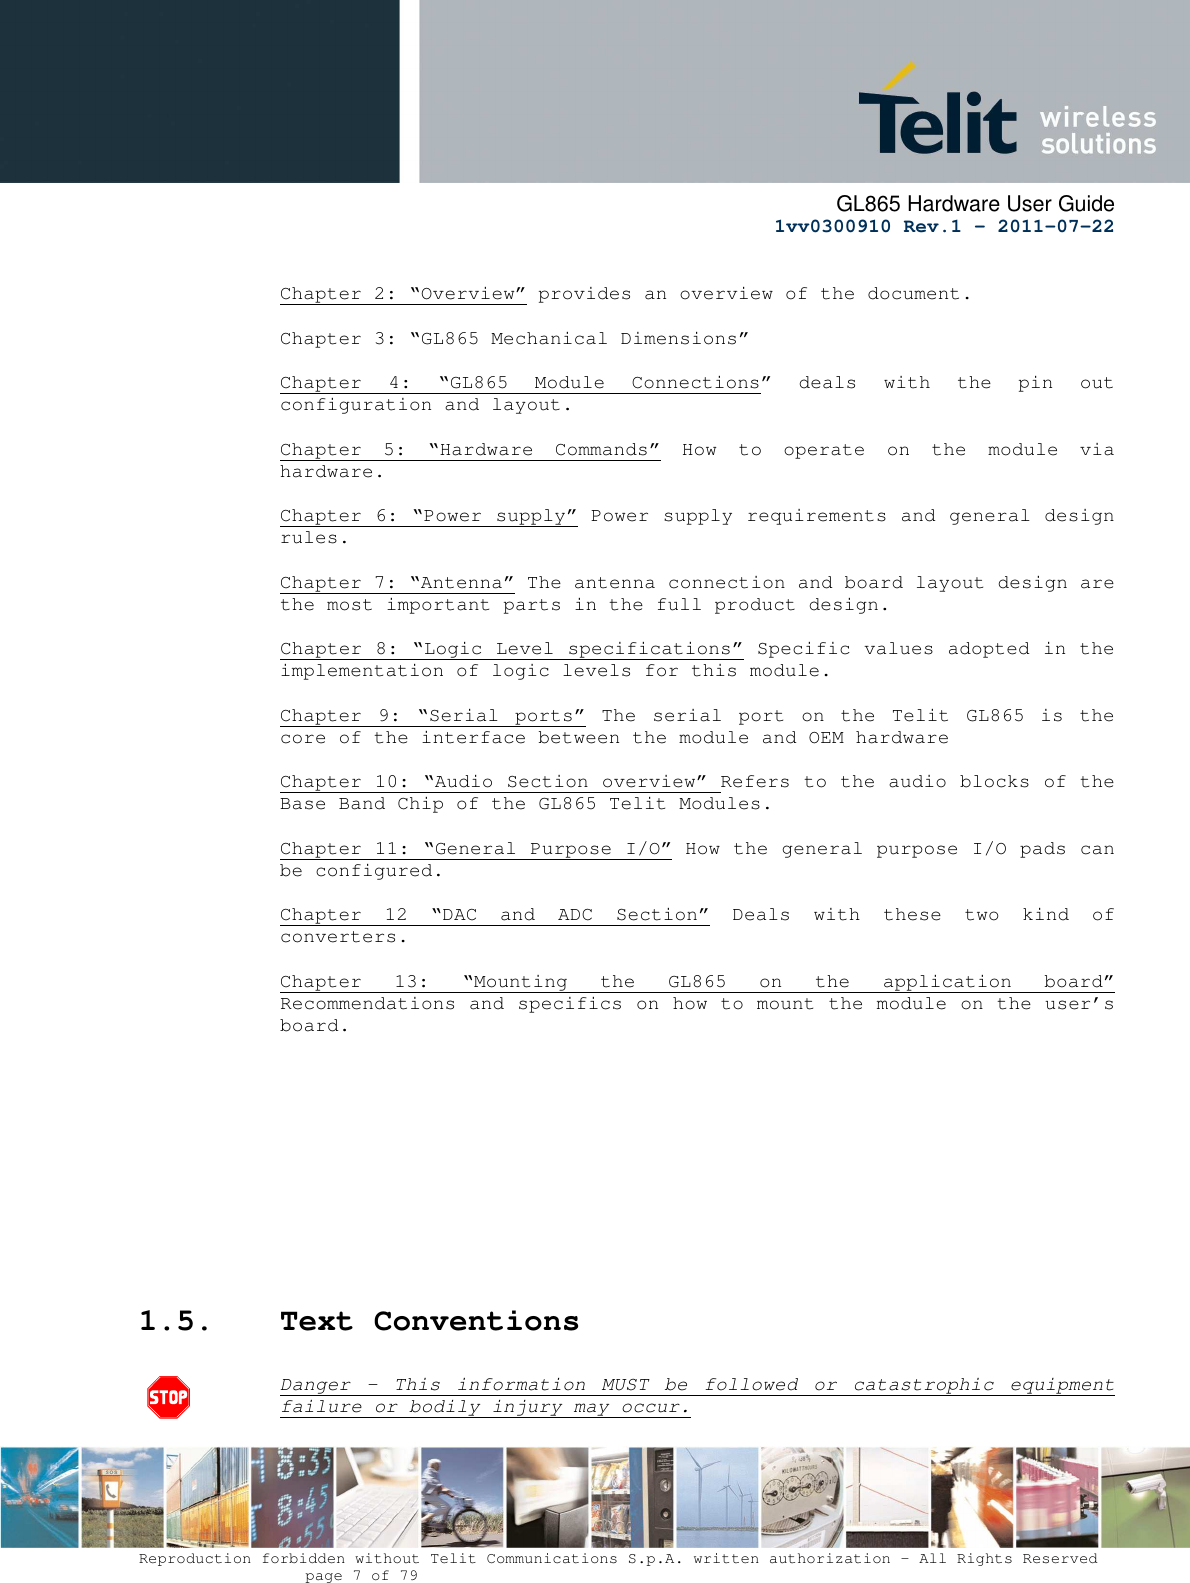      GL865 Hardware User Guide     1vv0300910 Rev.1 – 2011-07-22       Reproduction forbidden without Telit Communications S.p.A. written authorization - All Rights Reserved    page 7 of 79   Chapter 2: “Overview” provides an overview of the document.  Chapter 3: “GL865 Mechanical Dimensions”   Chapter  4:  “GL865  Module  Connections”  deals  with  the  pin  out configuration and layout.  Chapter  5:  “Hardware  Commands”  How  to  operate  on  the  module  via hardware.  Chapter 6: “Power supply” Power supply requirements and general design rules.  Chapter 7: “Antenna” The antenna connection and board layout design are the most important parts in the full product design.  Chapter 8: “Logic Level specifications” Specific values adopted in the implementation of logic levels for this module.            Chapter  9:  “Serial  ports”  The  serial  port  on  the  Telit  GL865  is  the core of the interface between the module and OEM hardware  Chapter 10: “Audio Section overview” Refers to the audio blocks of the Base Band Chip of the GL865 Telit Modules.  Chapter 11: “General Purpose I/O” How the general purpose I/O pads can be configured.  Chapter  12  “DAC  and  ADC  Section”  Deals  with  these  two  kind  of converters.  Chapter  13:  “Mounting  the  GL865  on  the  application  board” Recommendations and specifics on how to mount the module on the user’s board.            1.5. Text Conventions  Danger  –  This  information  MUST  be  followed  or  catastrophic  equipment failure or bodily injury may occur.  